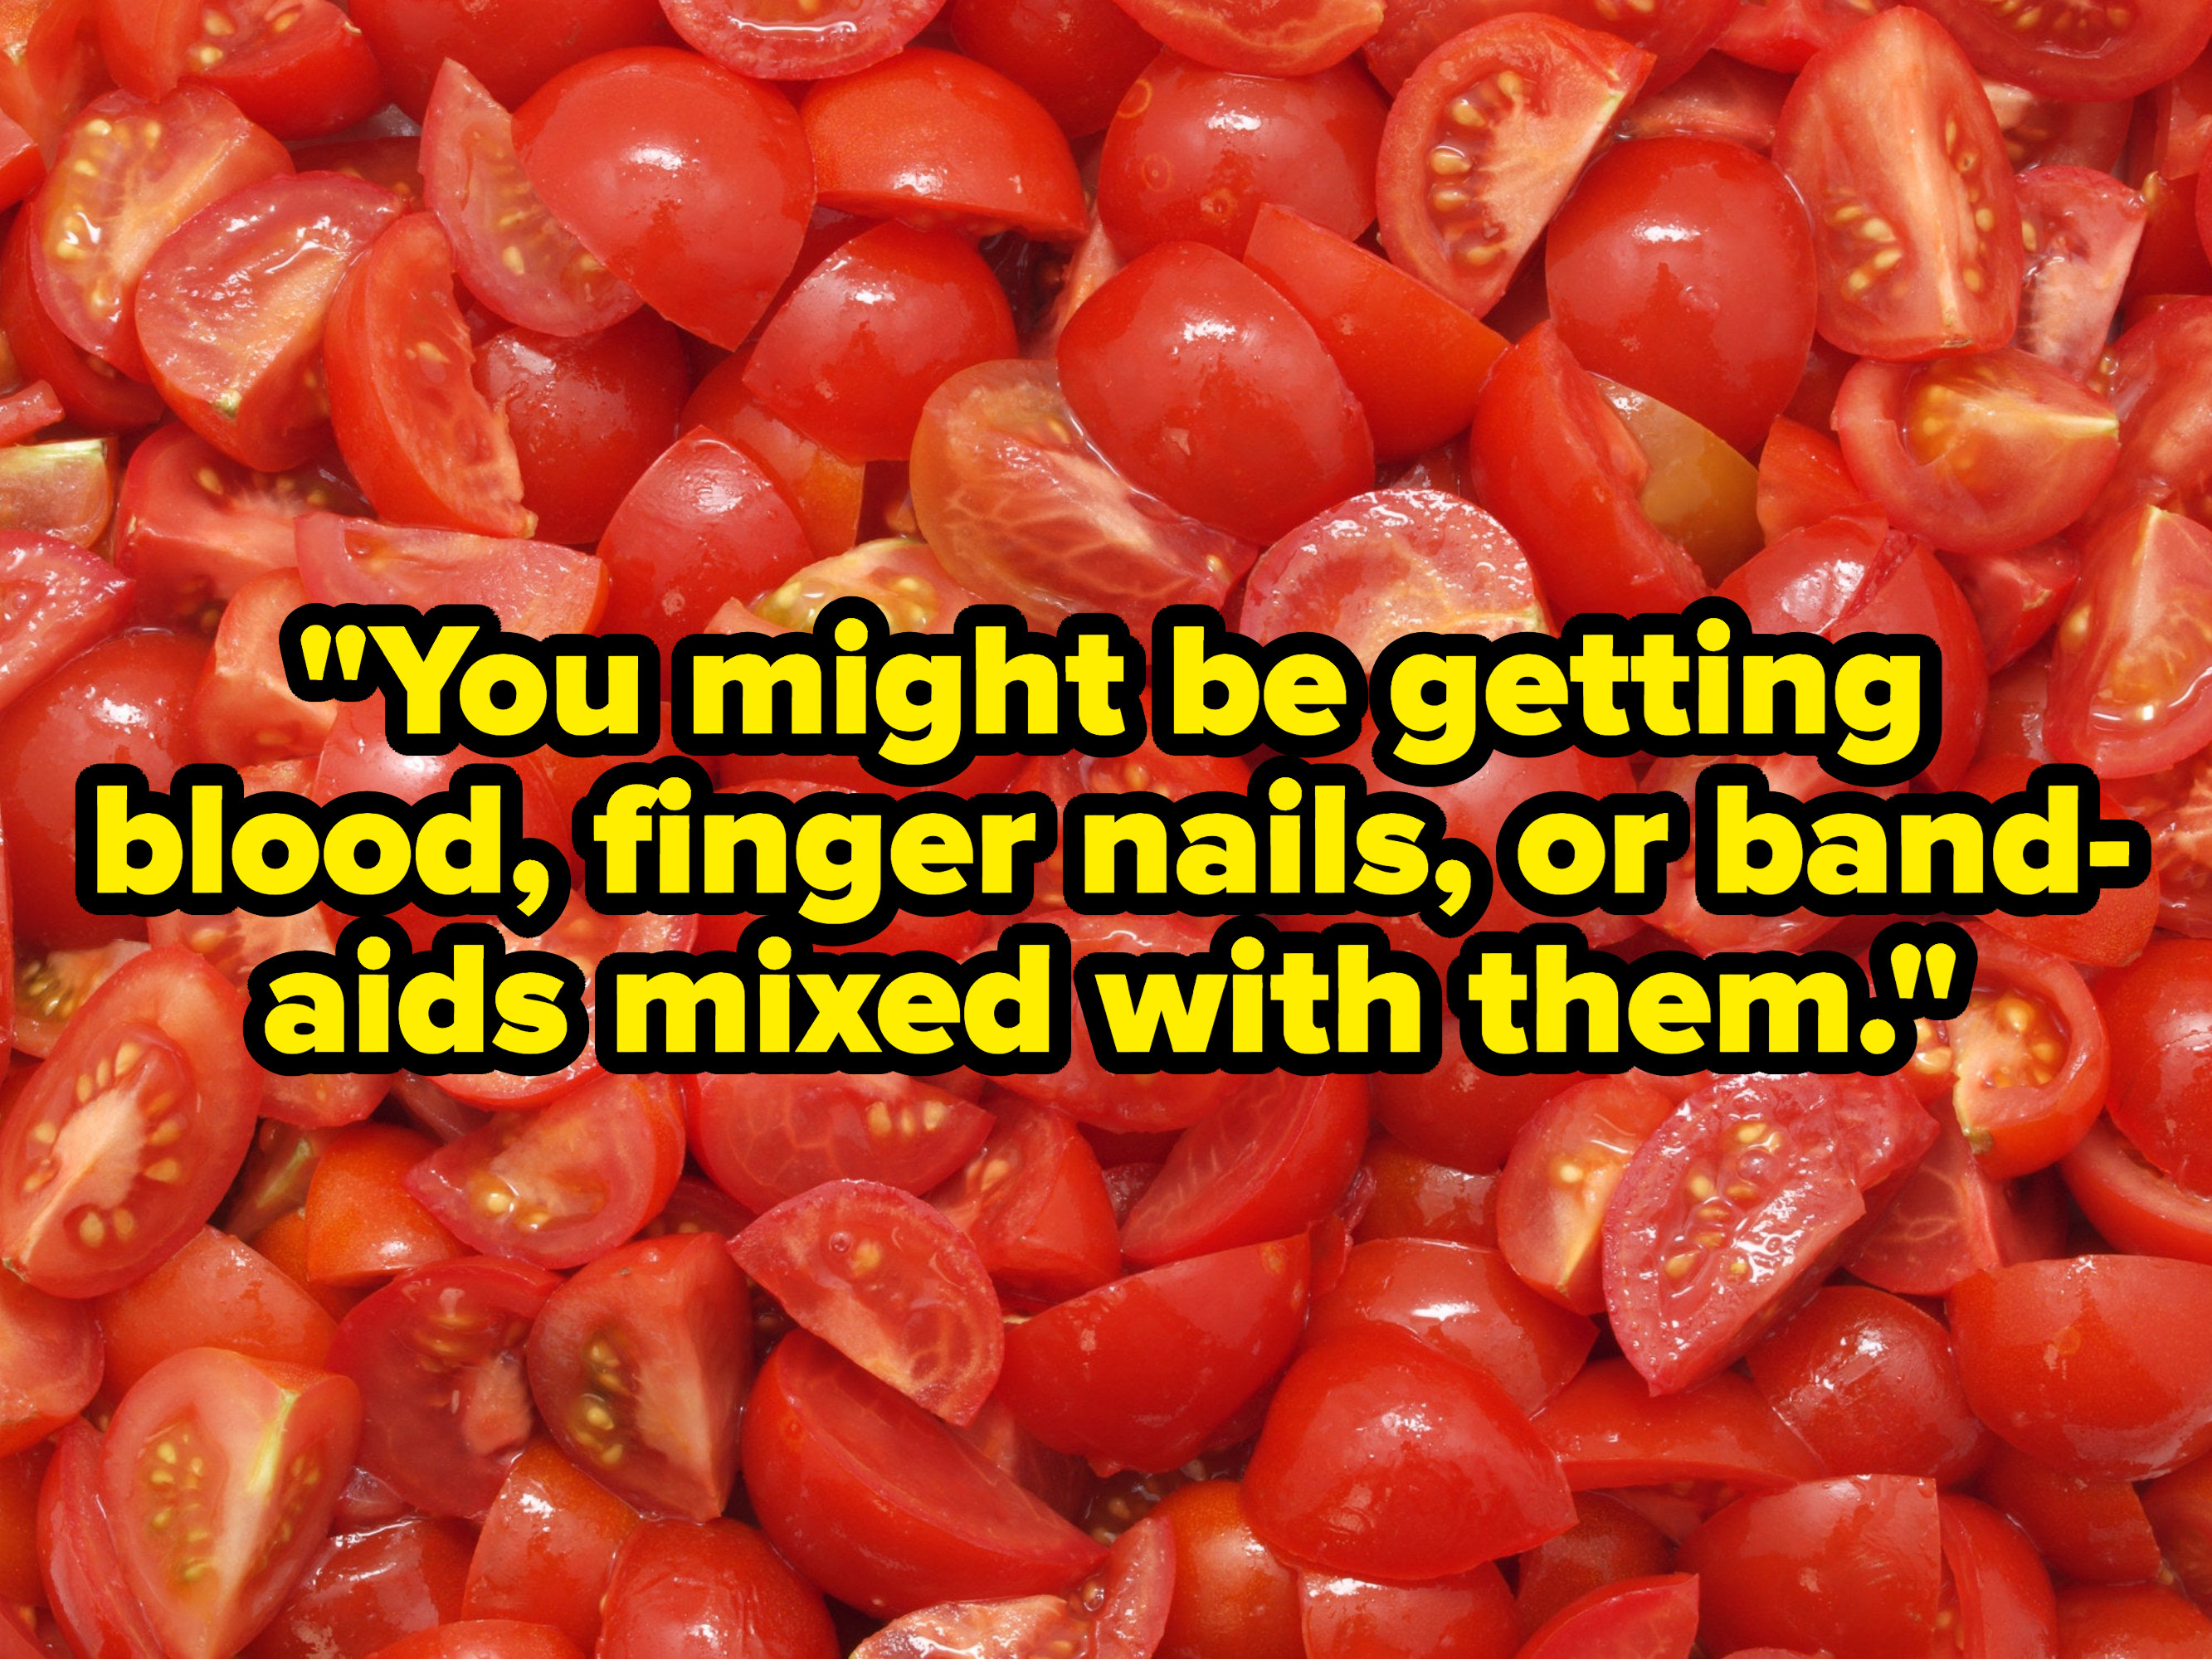 &quot;You might be getting blood, finger nails, or Bandaids mixed with them&quot; over chopped tomatoes